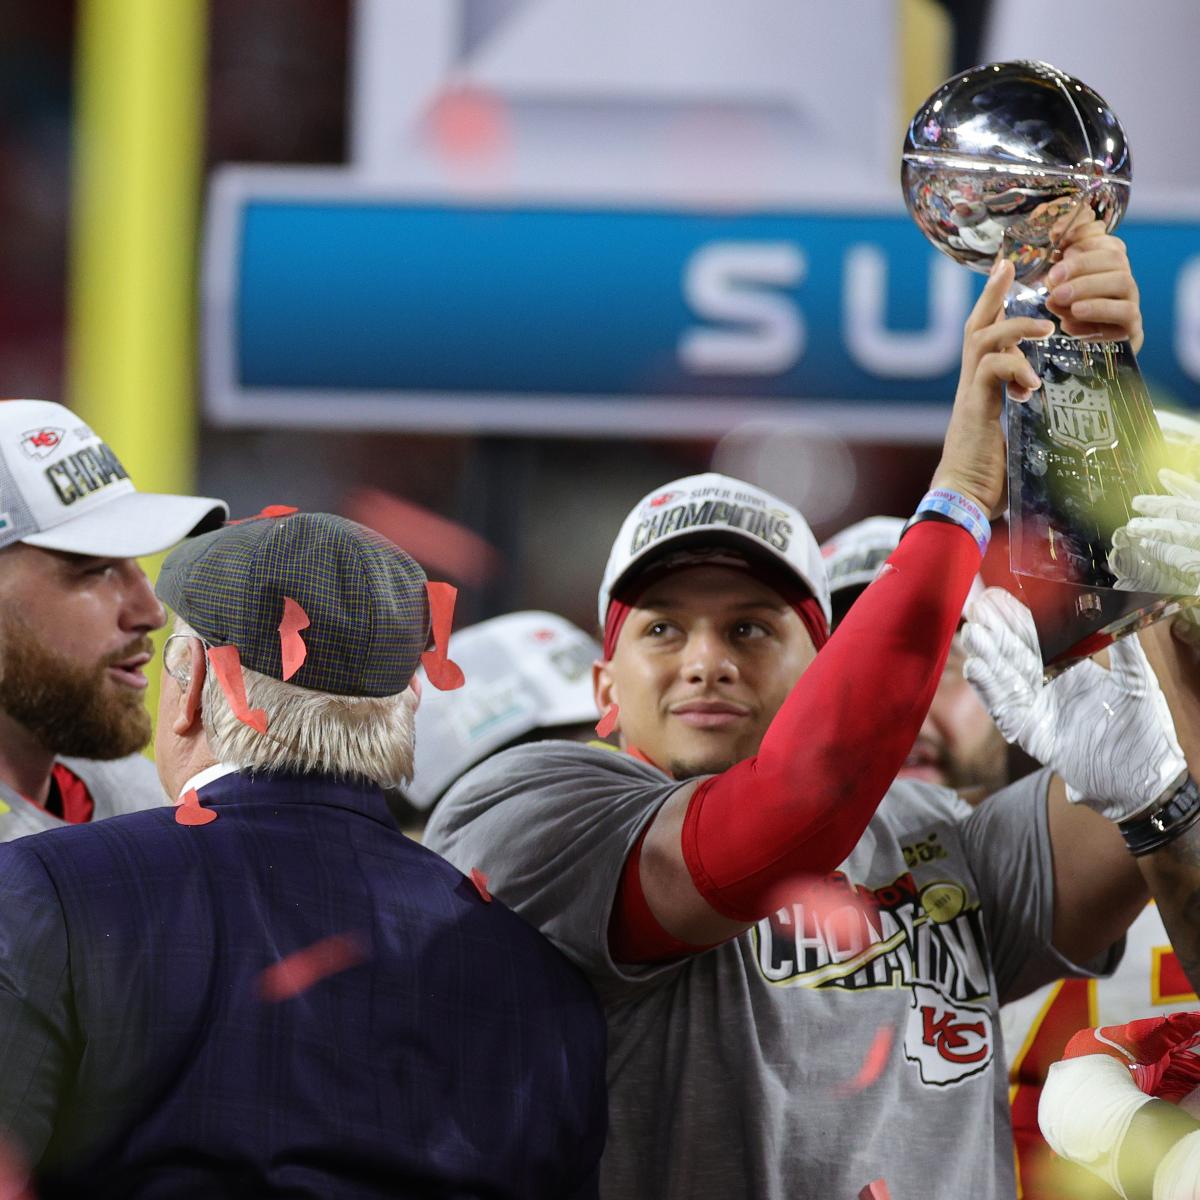 Chiefs Parade 2020 Live Stream, TV Schedule and Weather Forecast